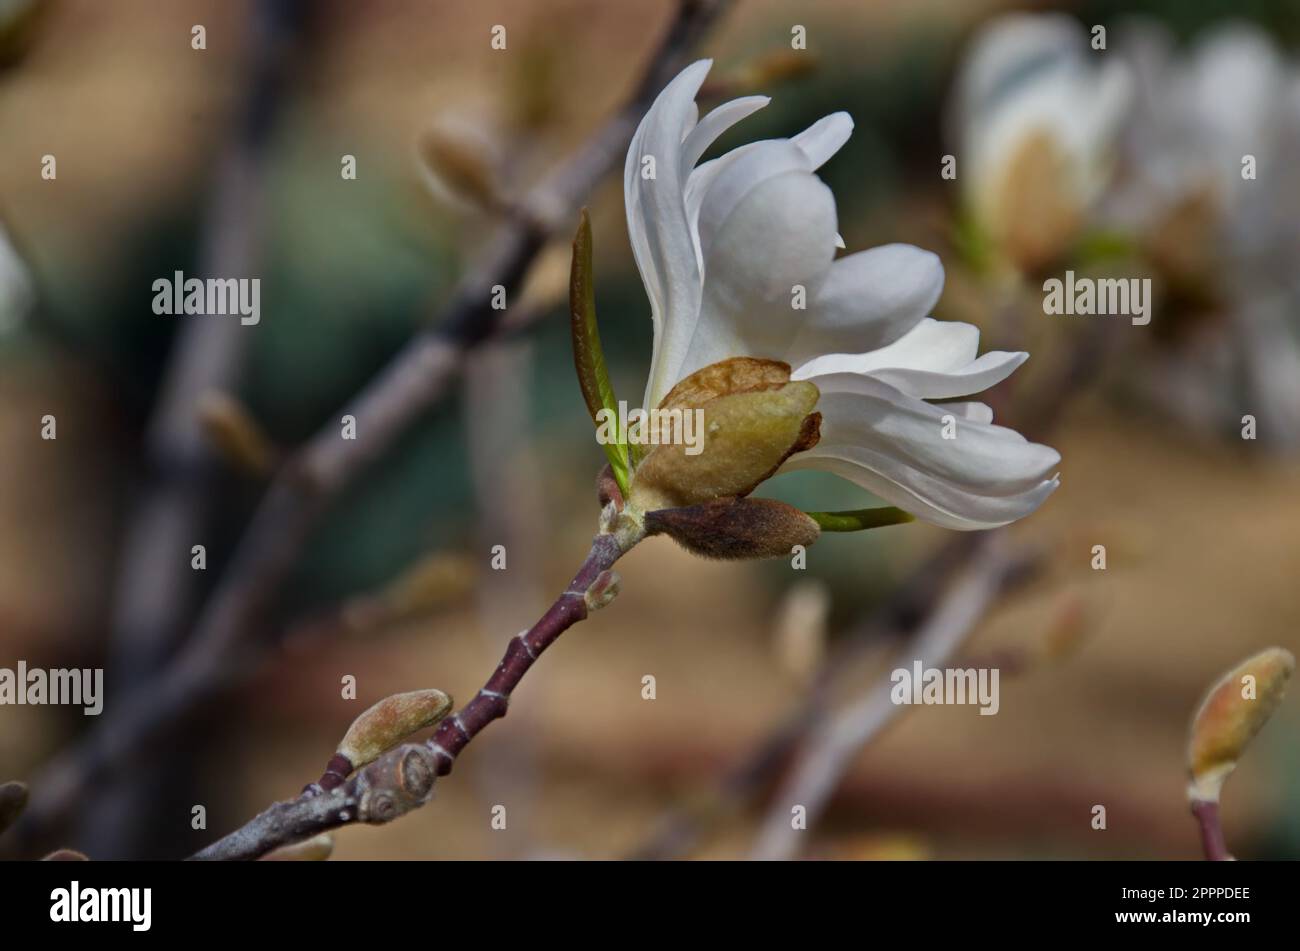 Twig with white bloom and leaves of magnolia tree at springtime in garden, Sofia, Bulgaria Stock Photo